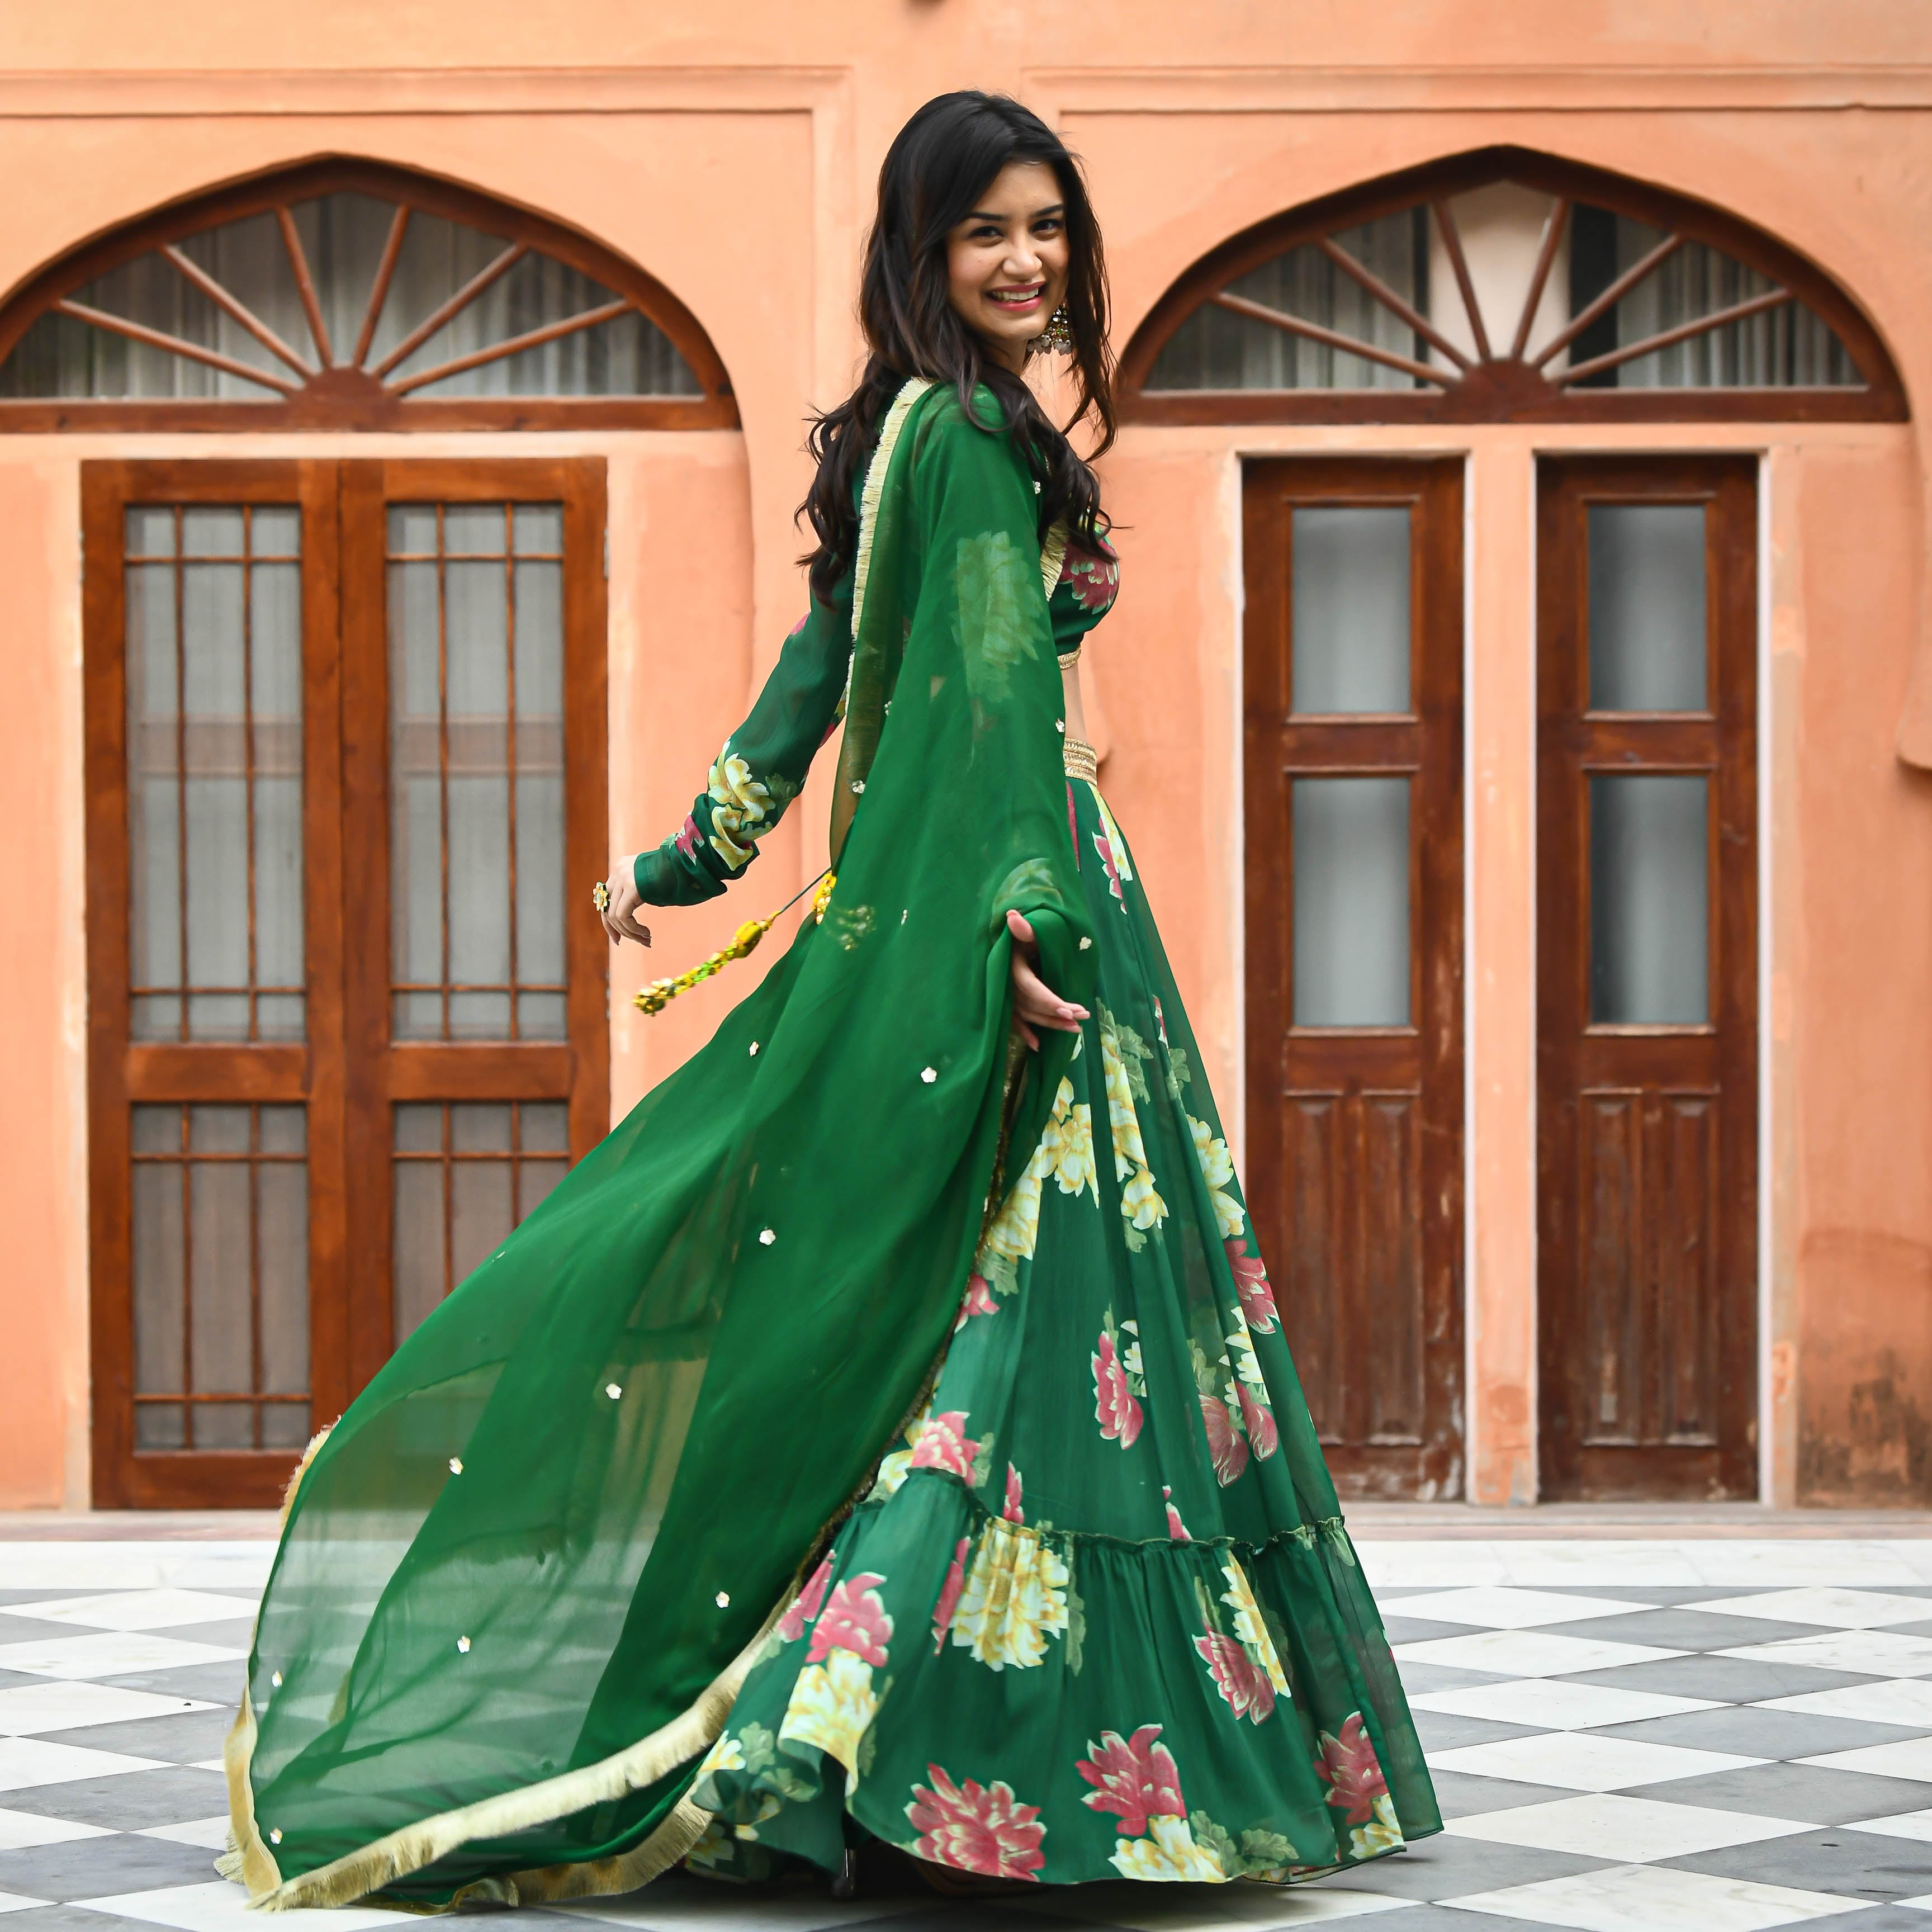 Green Georgette Floral Lehenga Choli With Dupatta For Women Online